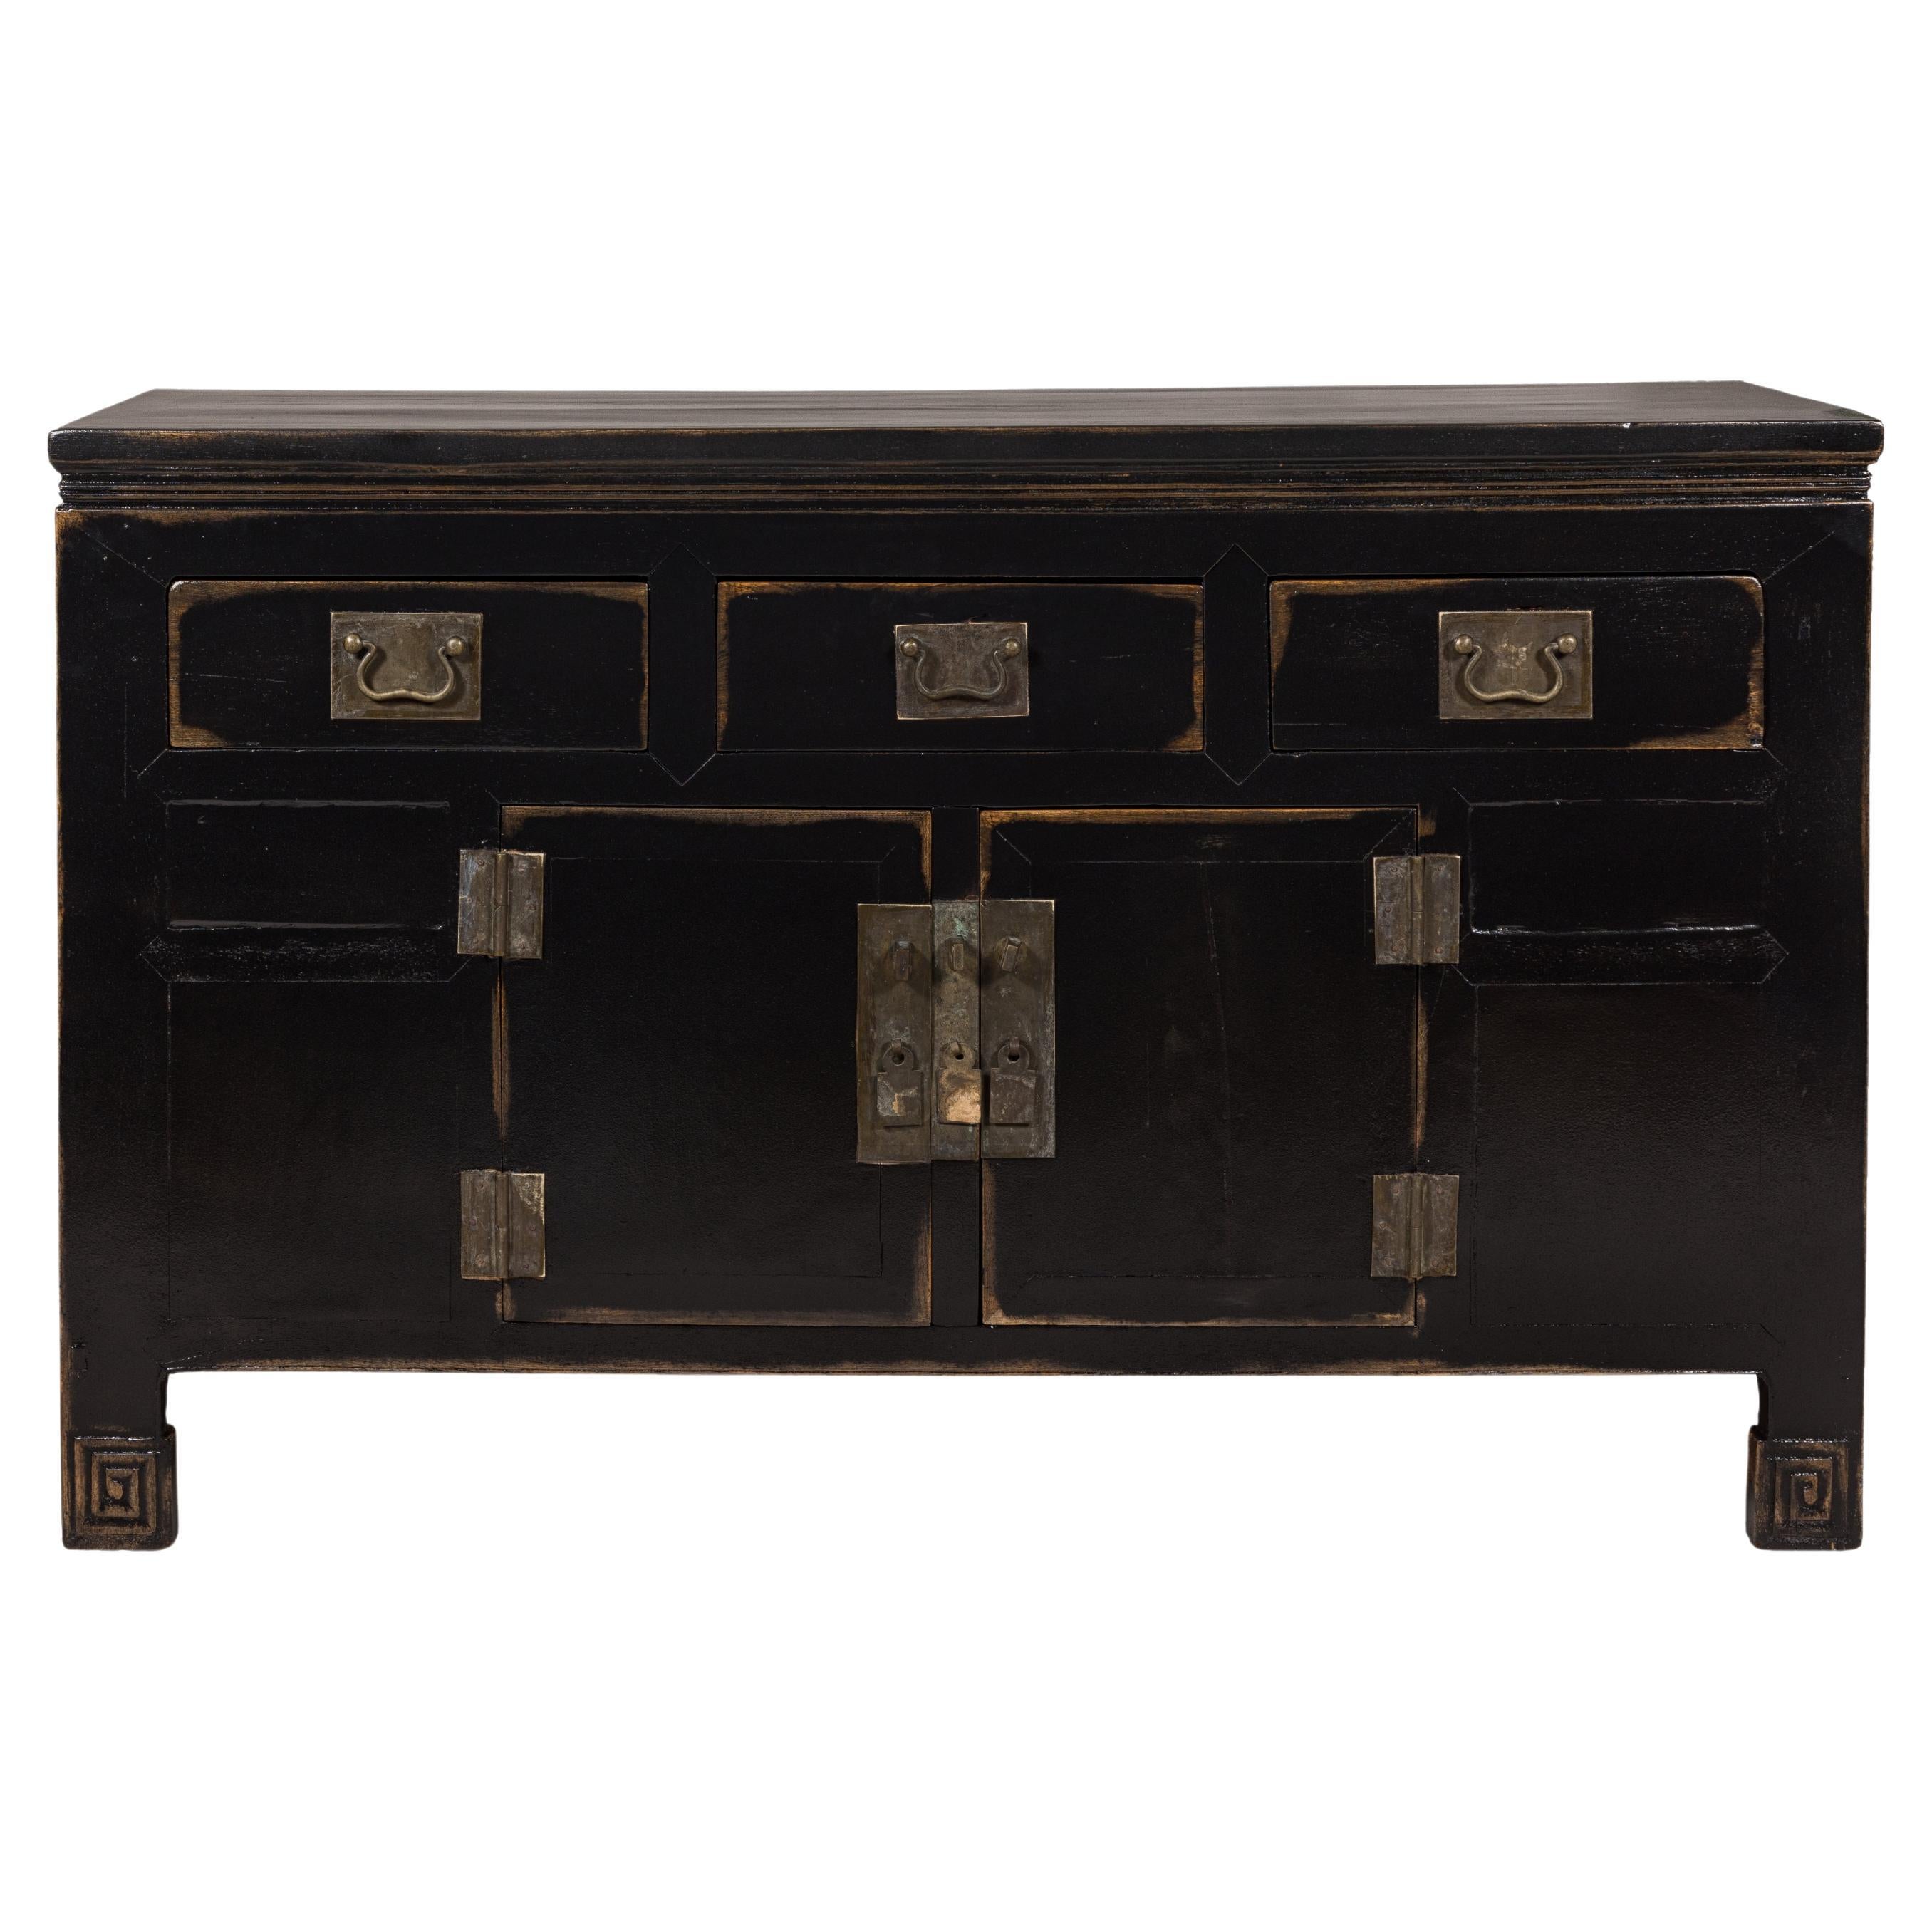 Black Lacquer Sideboard with Rubbed Edges, Brass Hardware, Doors and Drawers